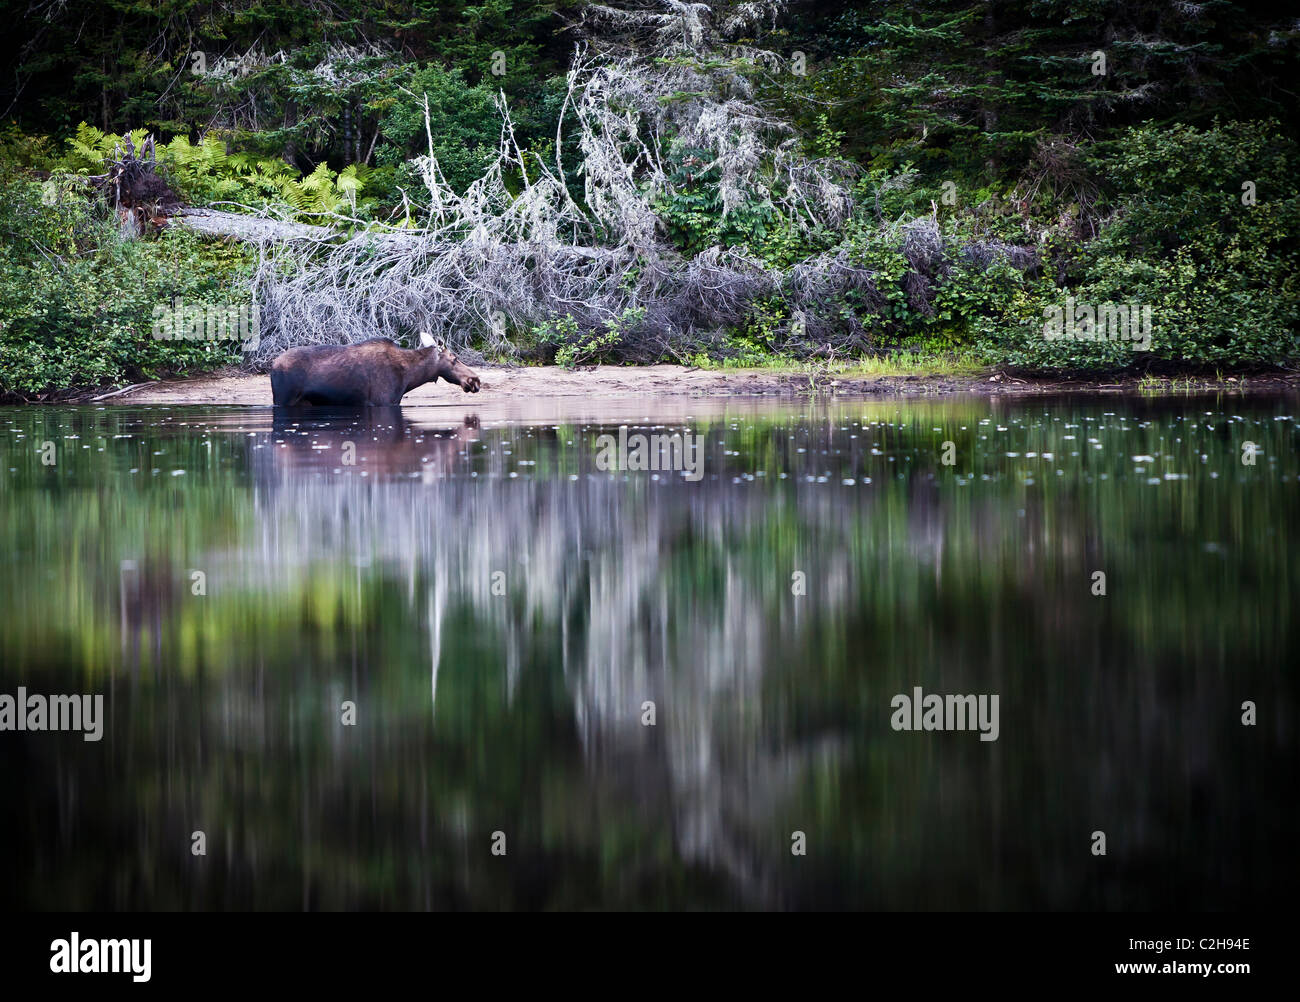 Moose in the forest, Jacques Cartier National Park, Quebec, Canada Stock Photo